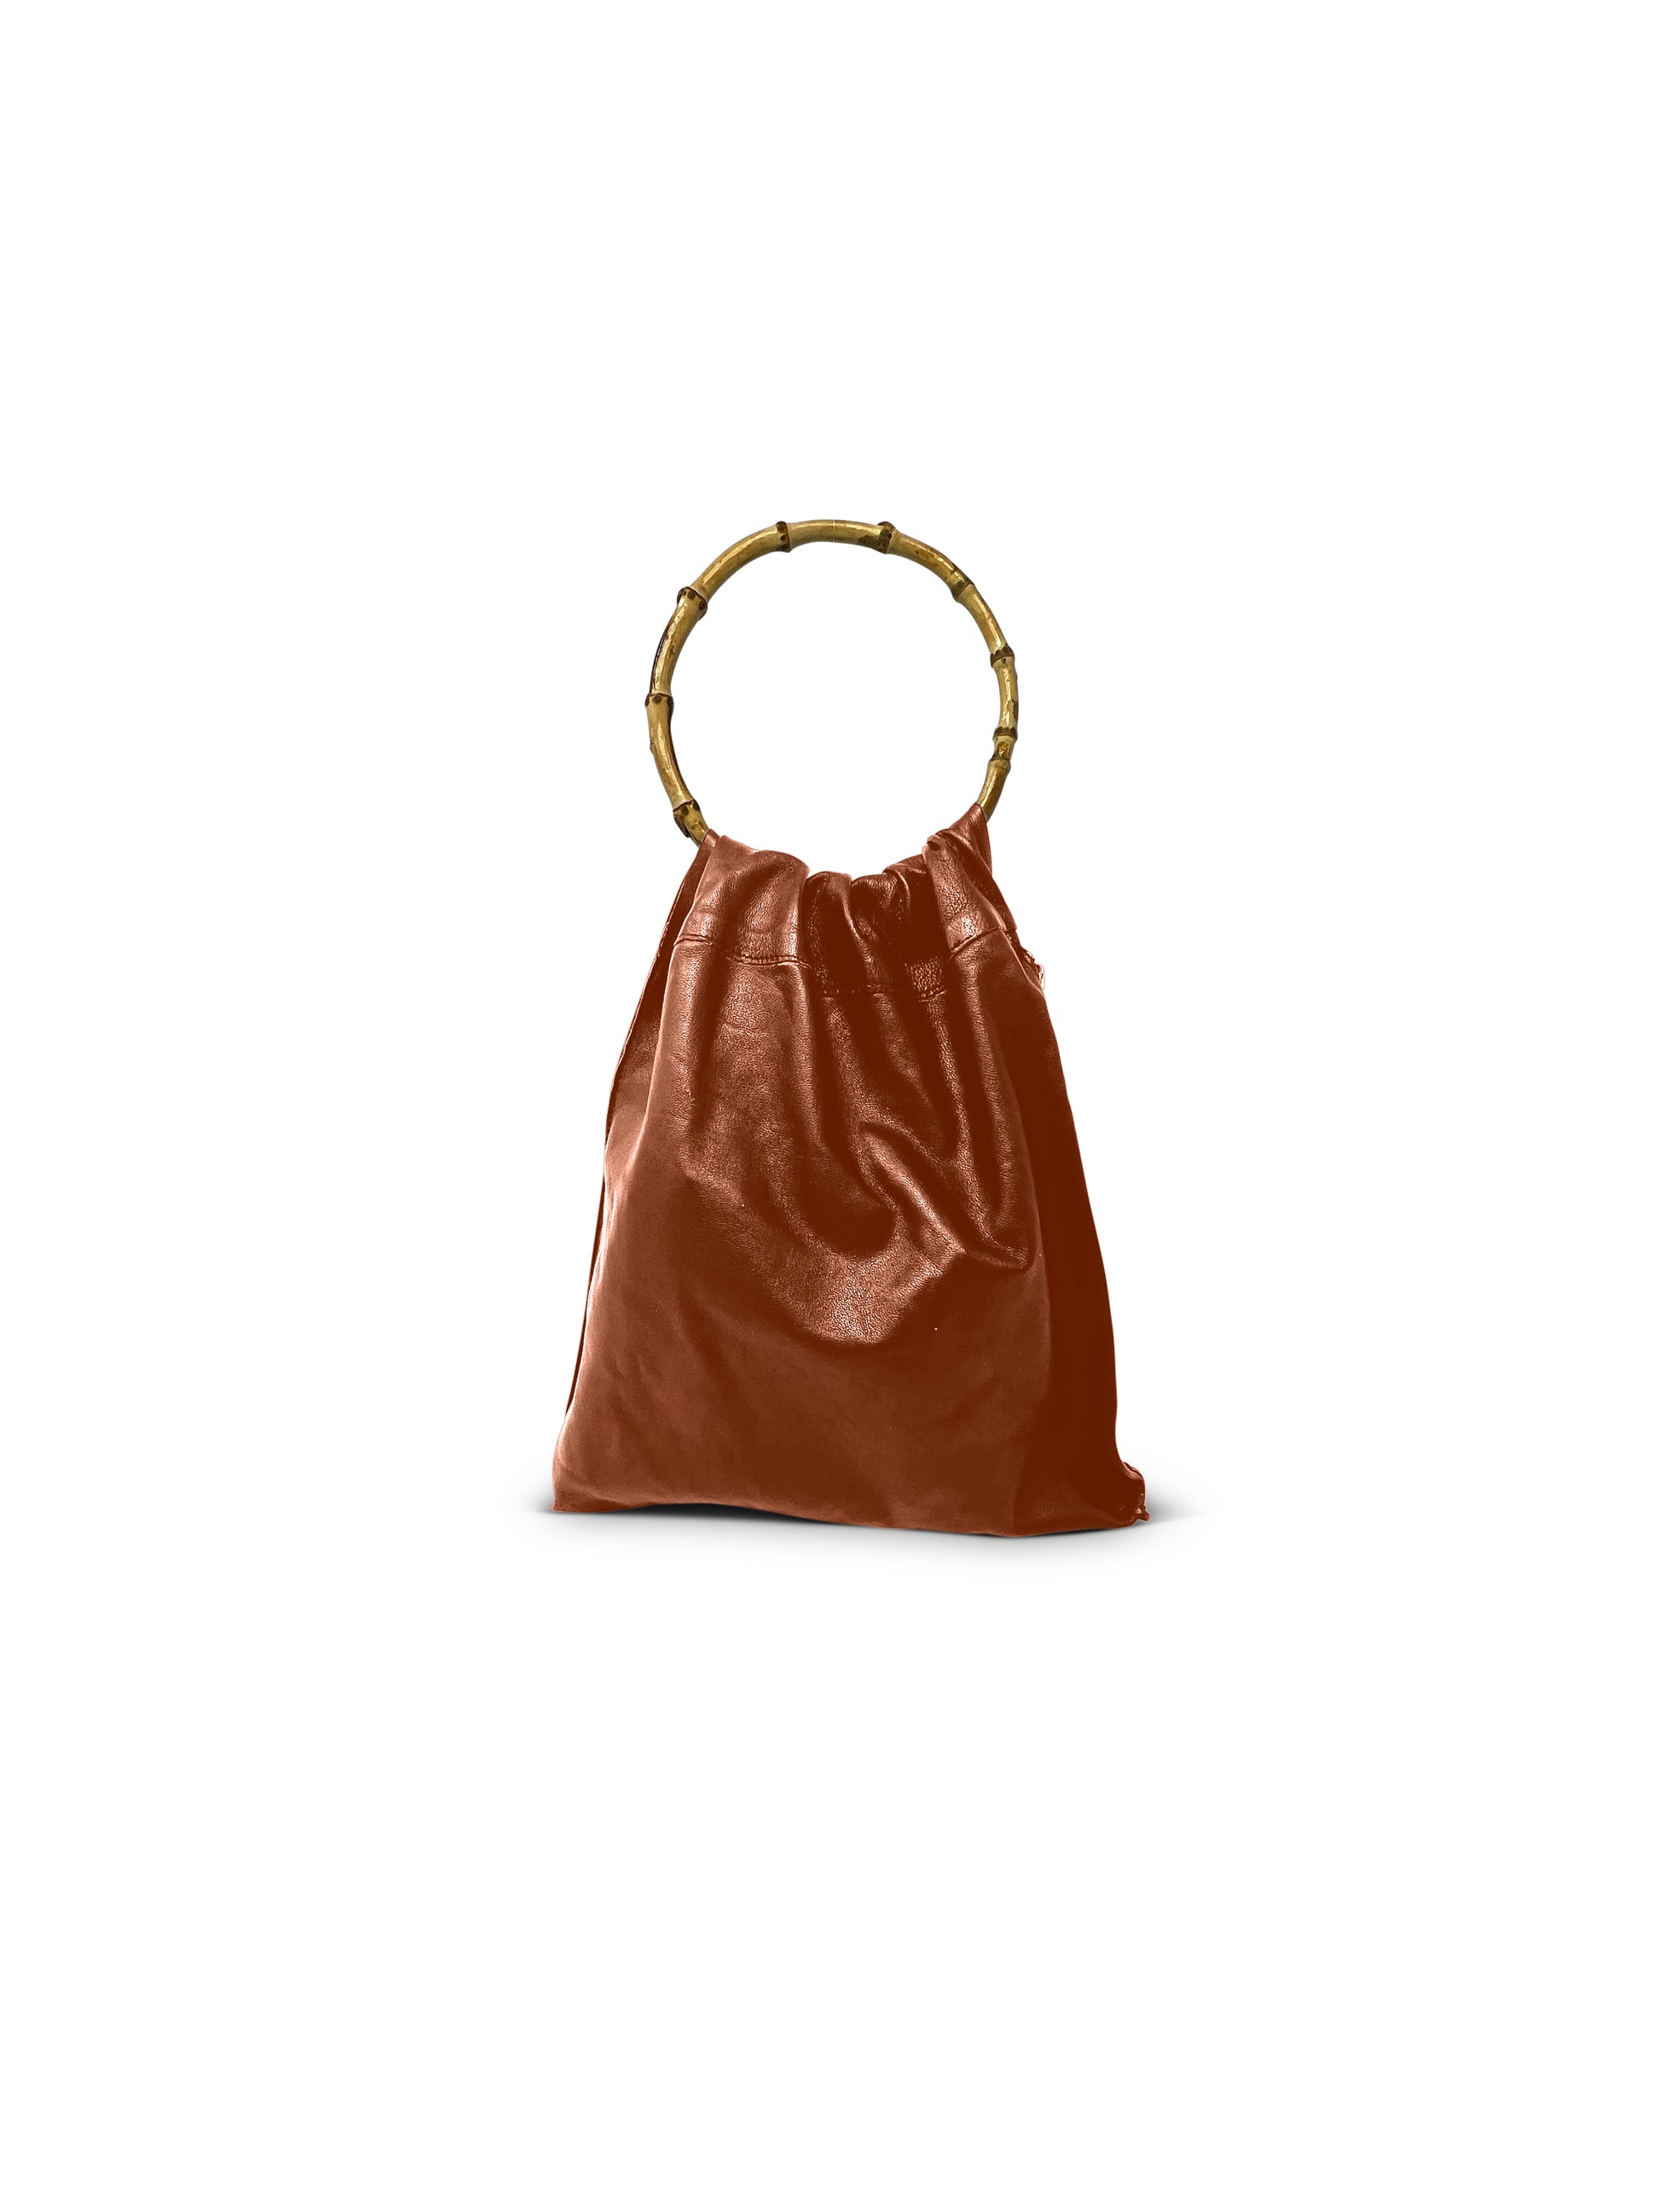 Brown leather bag with round bamboo handle.